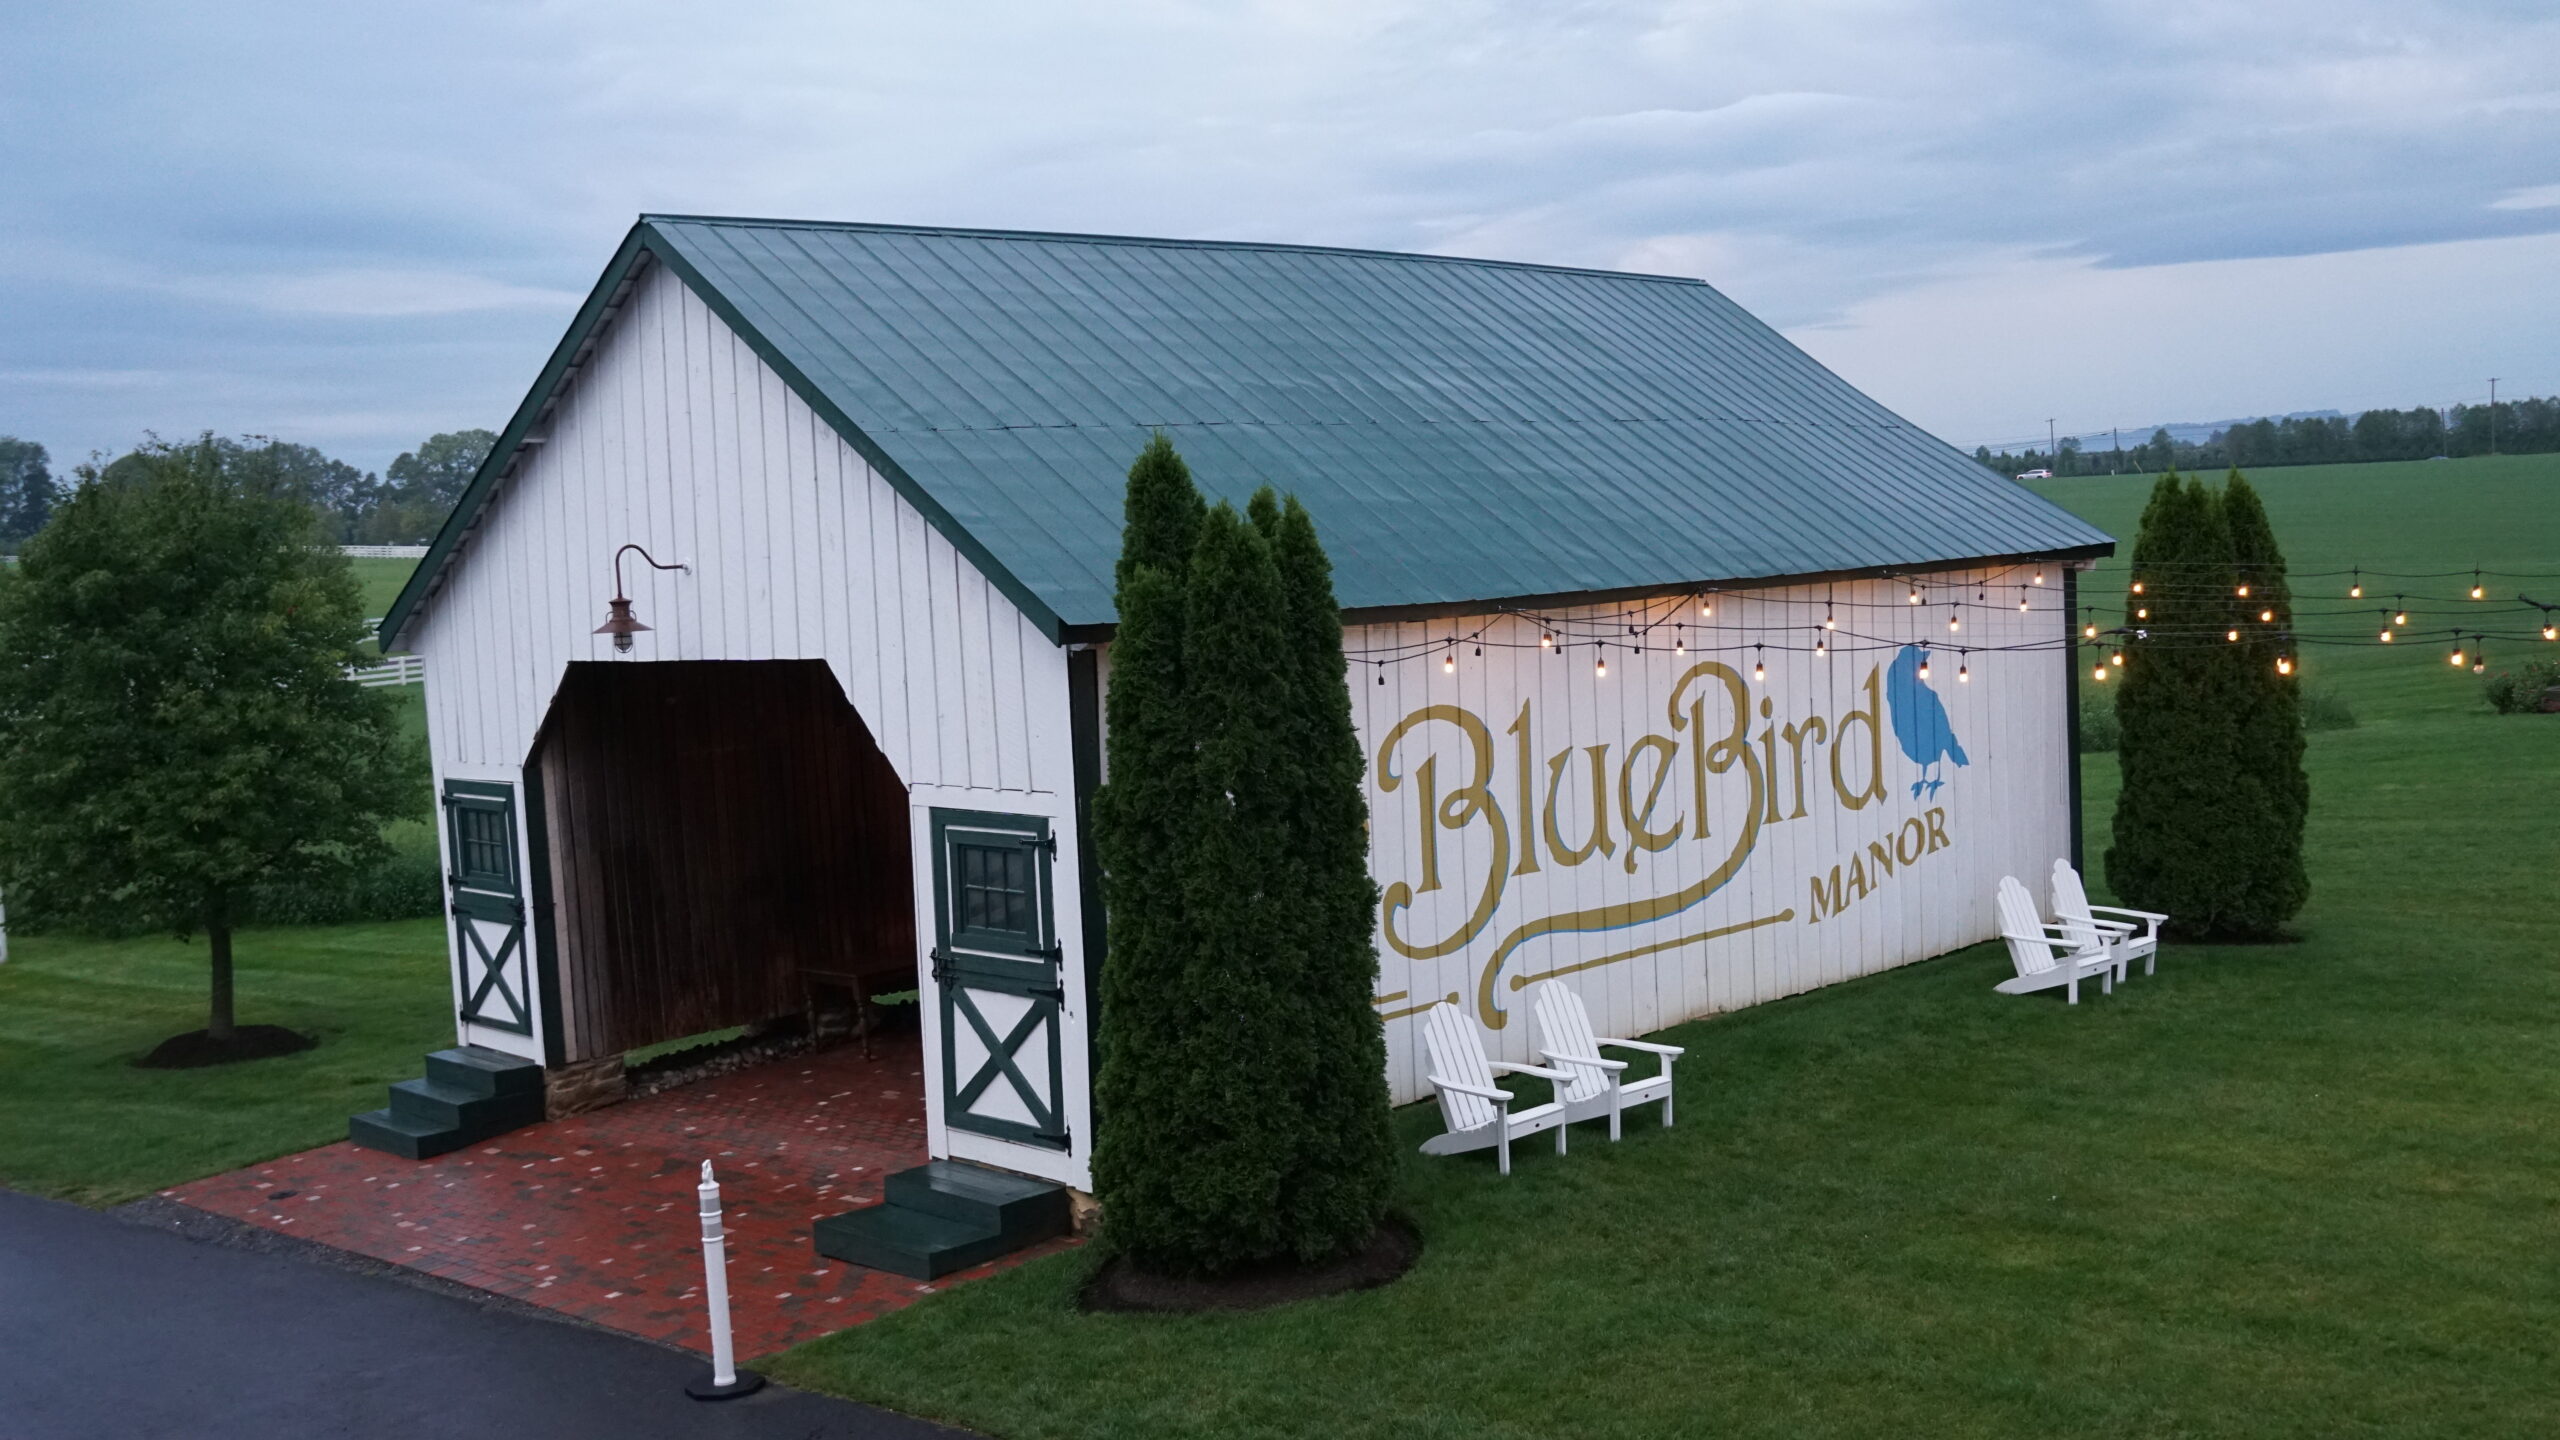 A barn with a blue bird sign painted on it.